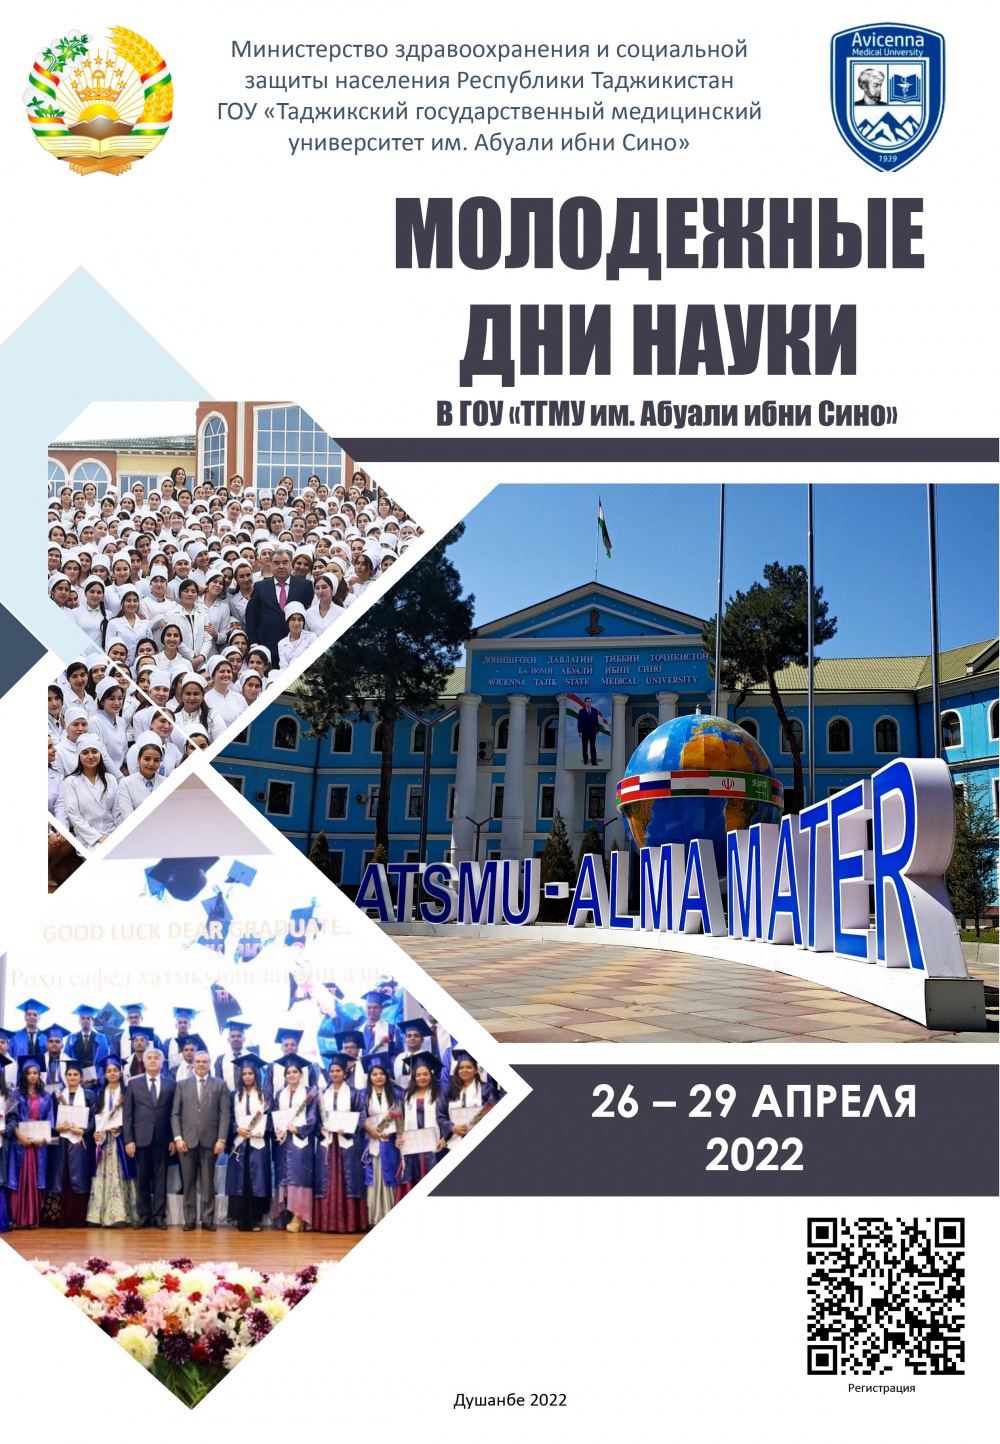 SEI"Avicenna State Medical University" has launched scientific - practical conference  on "Youth Science Days" 